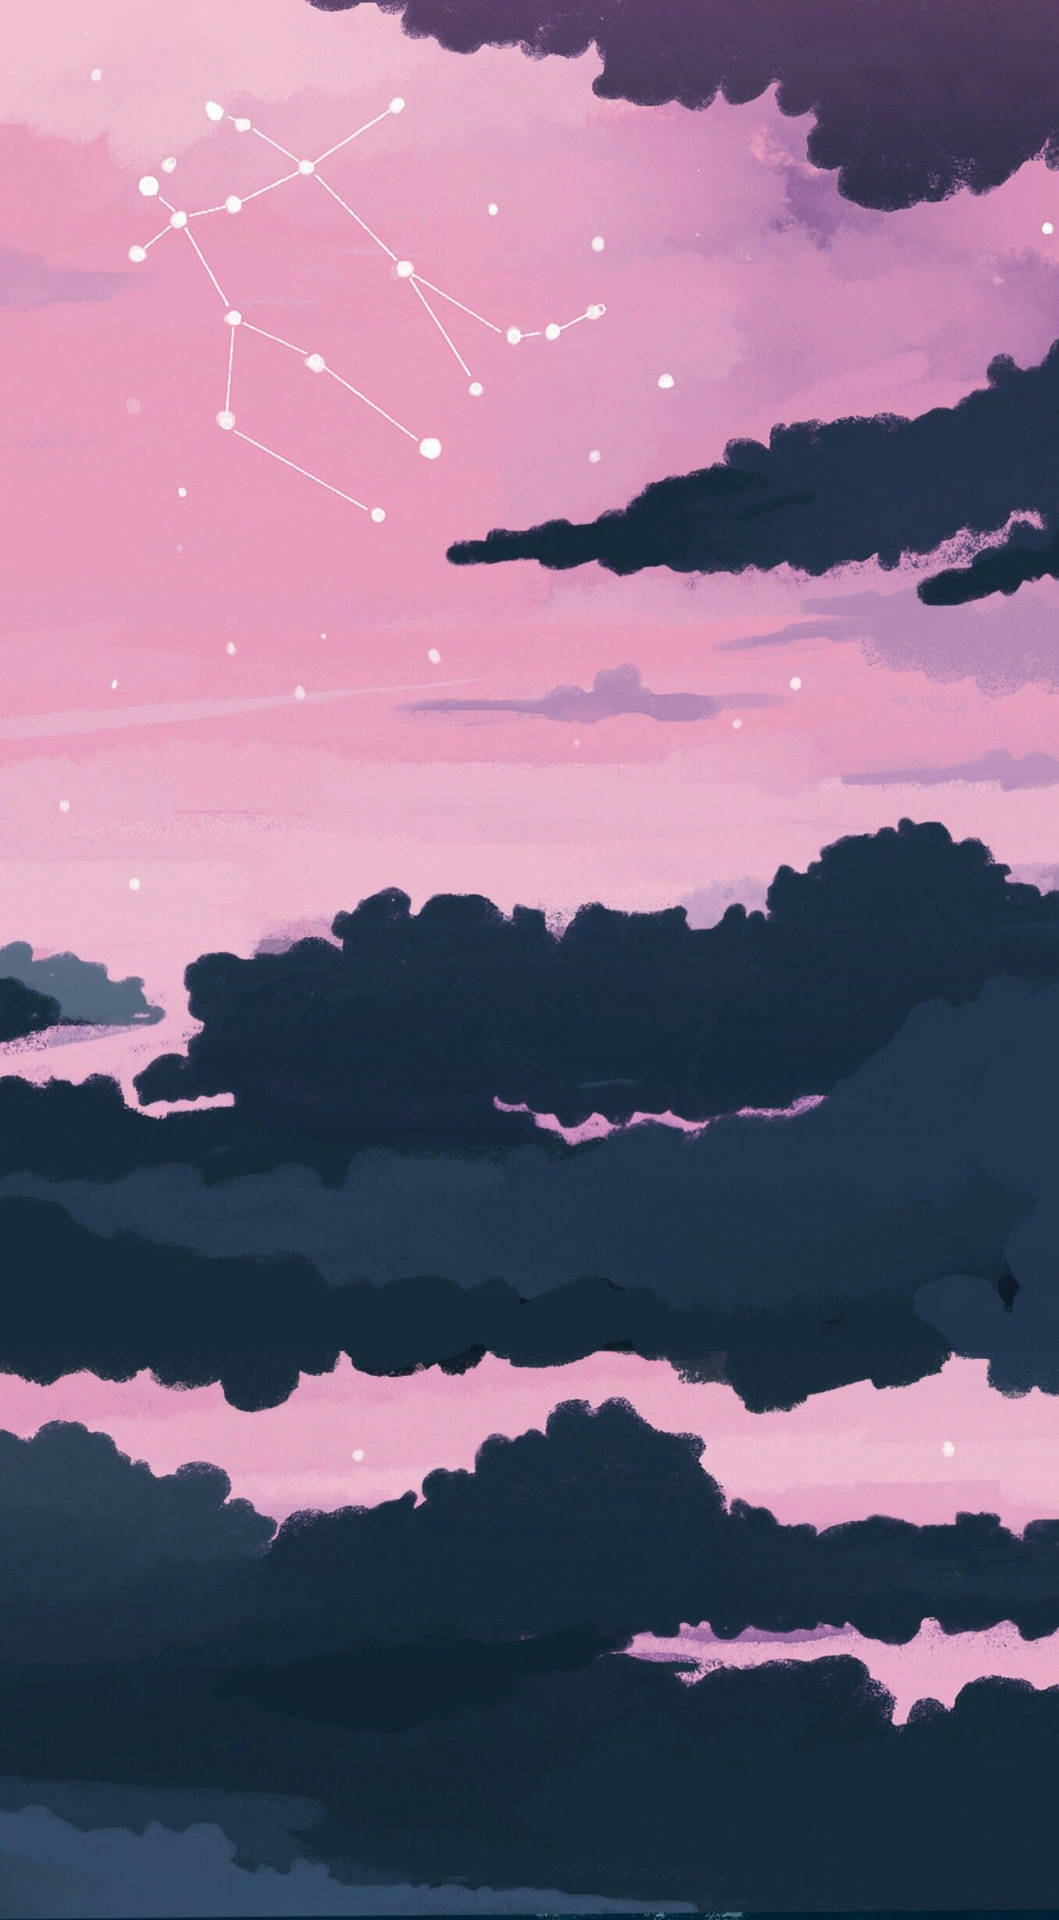 Black Clouds Pink Sky Tumblr Aesthetic Background